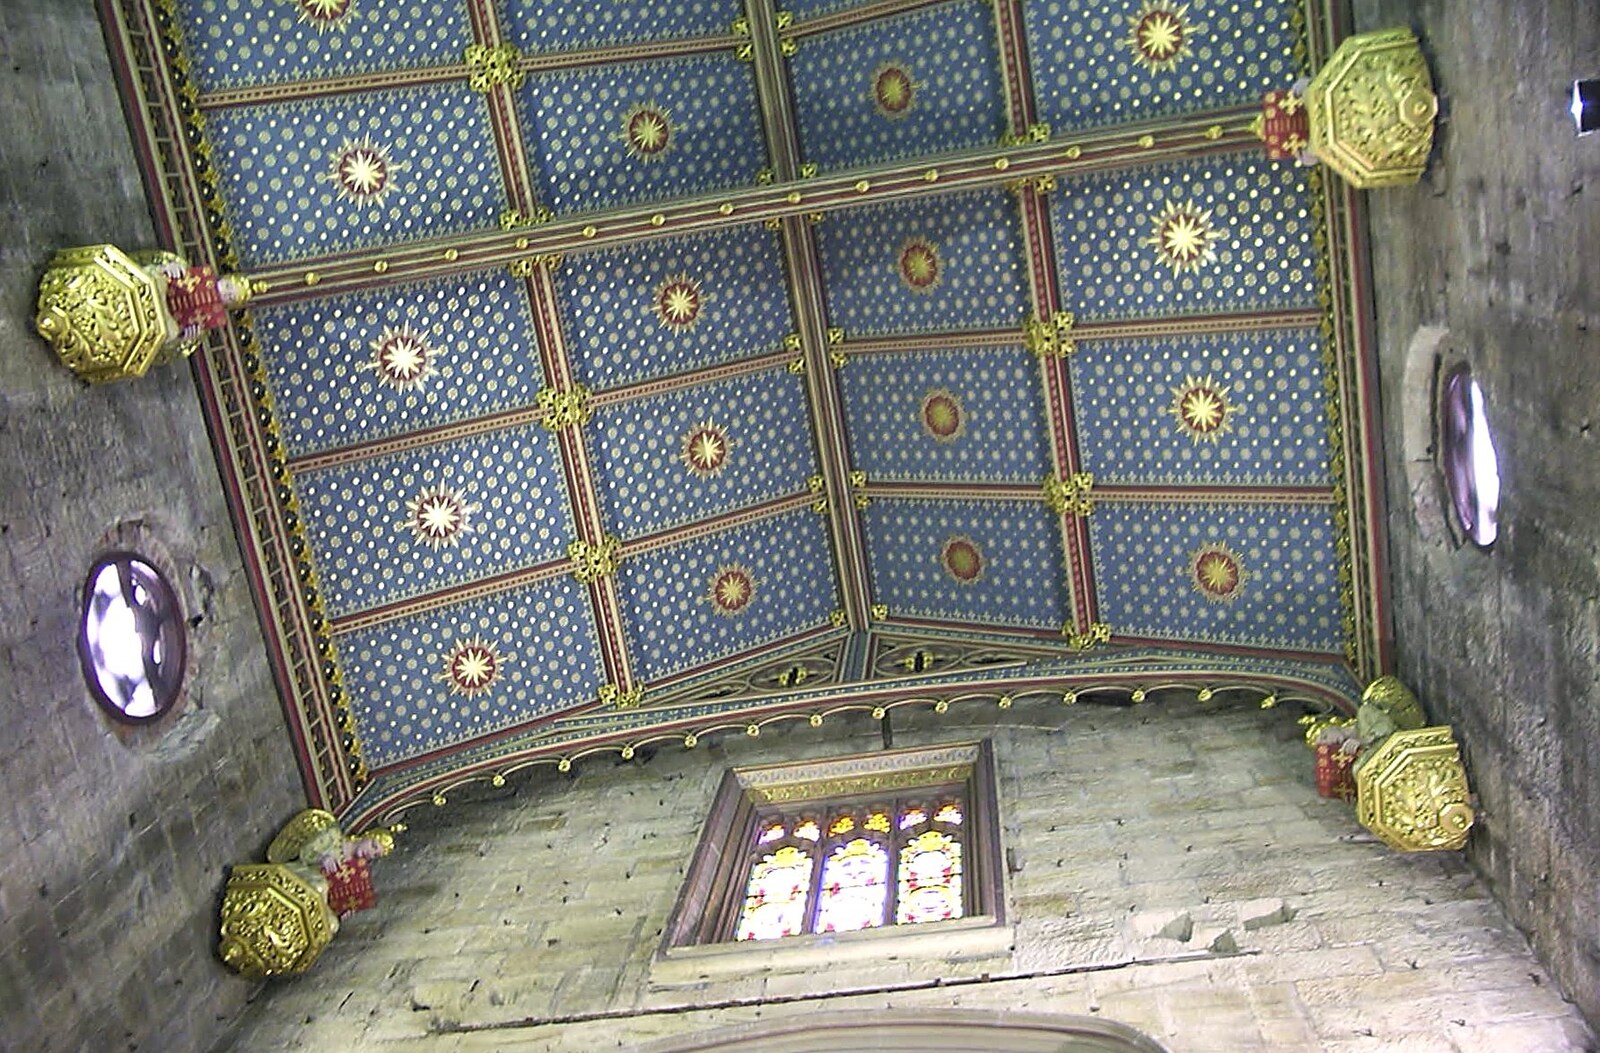 A Trip to Alton Towers, Staffordshire - 19th June 2004: A nice roof in the house